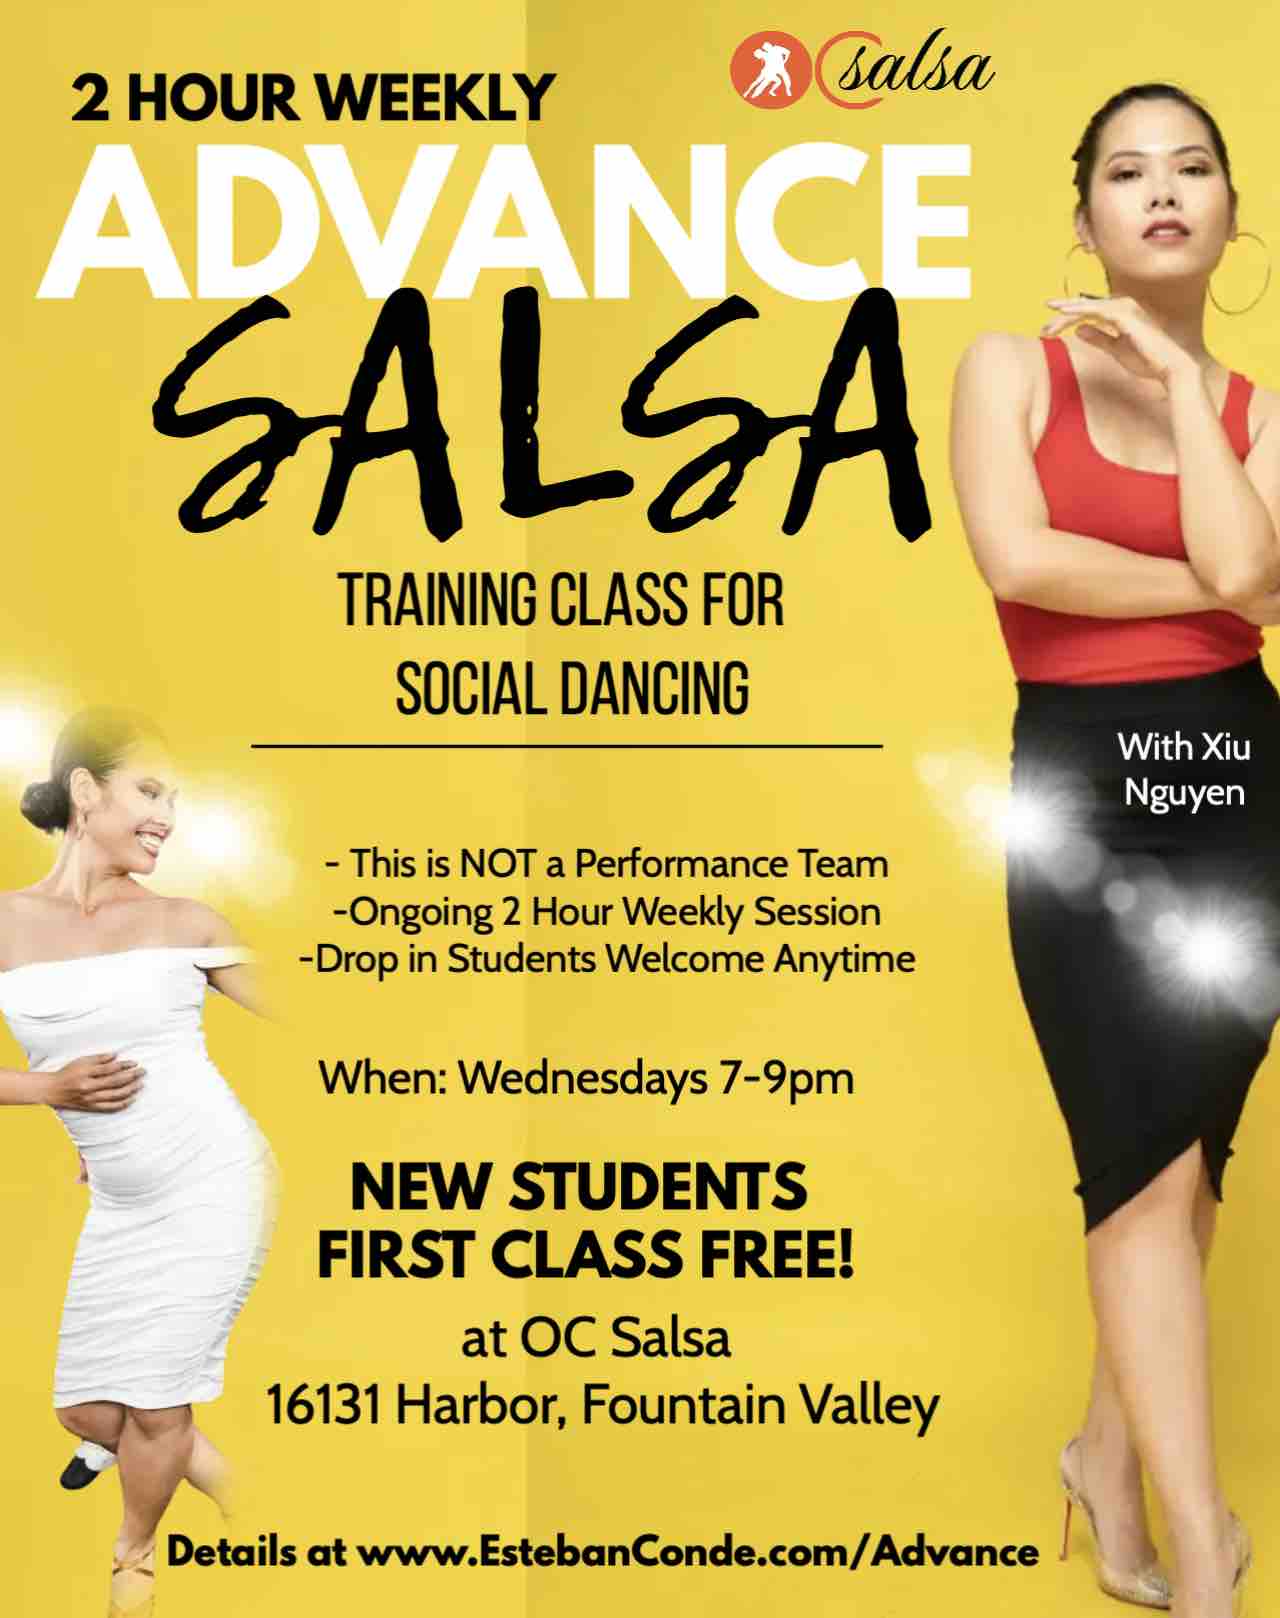 weekly Advance Salsa Class at OC Salsa Dance Studio in Fountain Valley